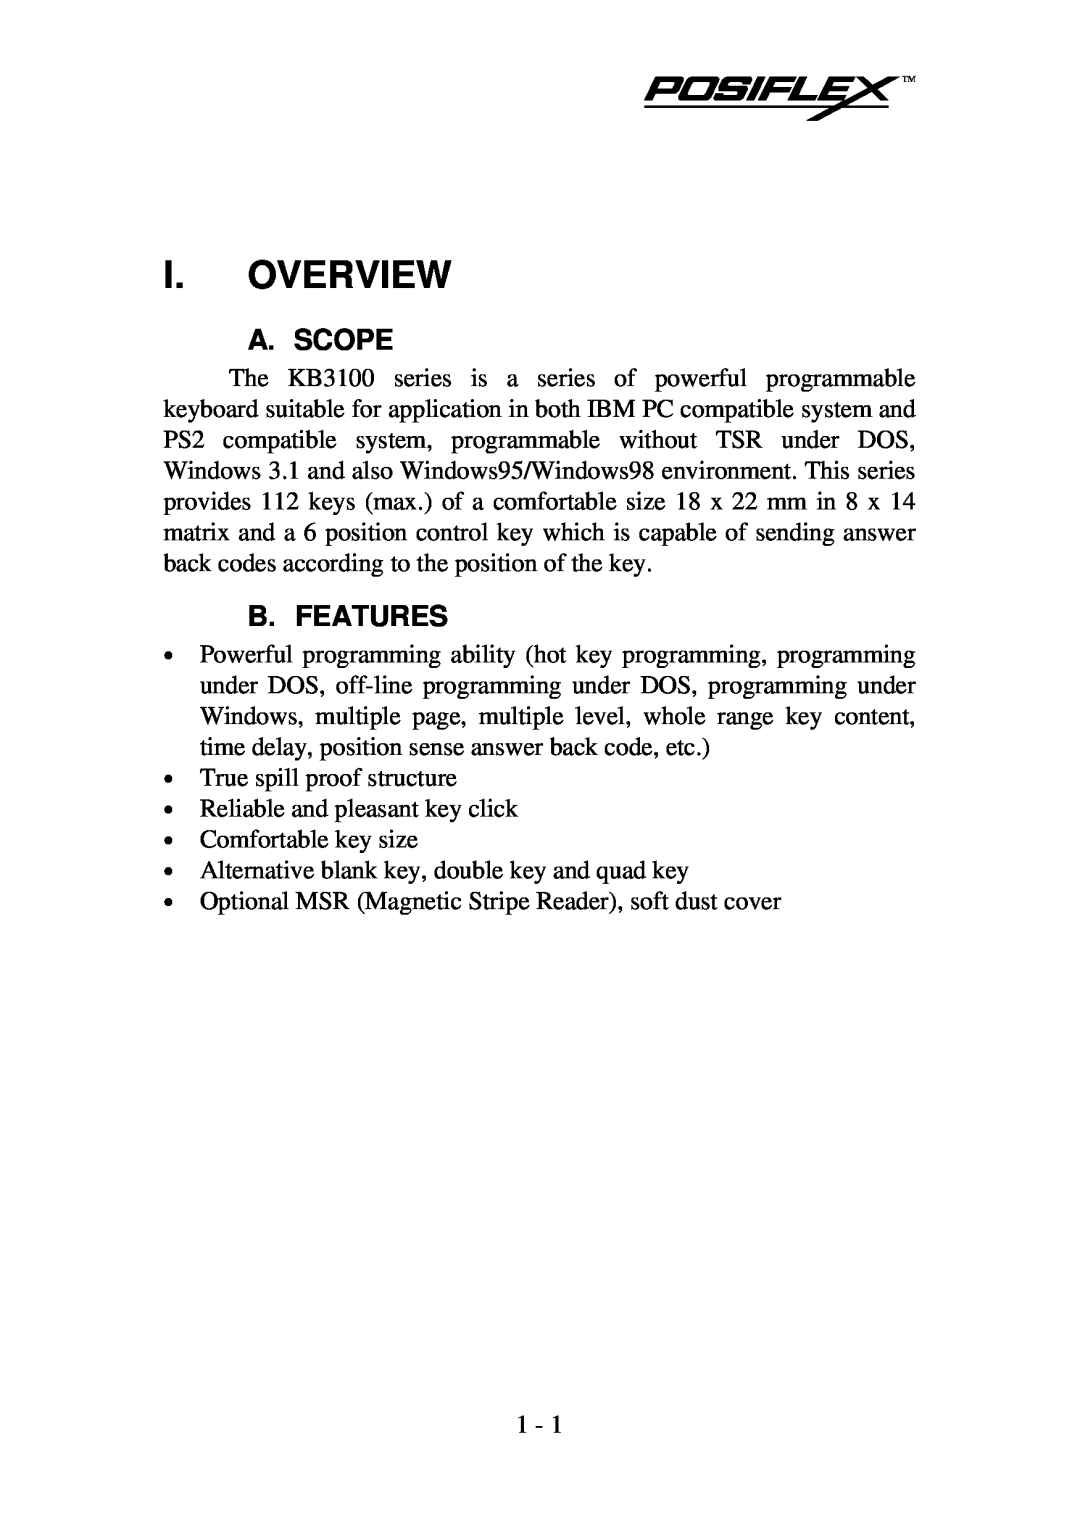 Mustek KB3100 user manual I. Overview, A. Scope, B. Features 